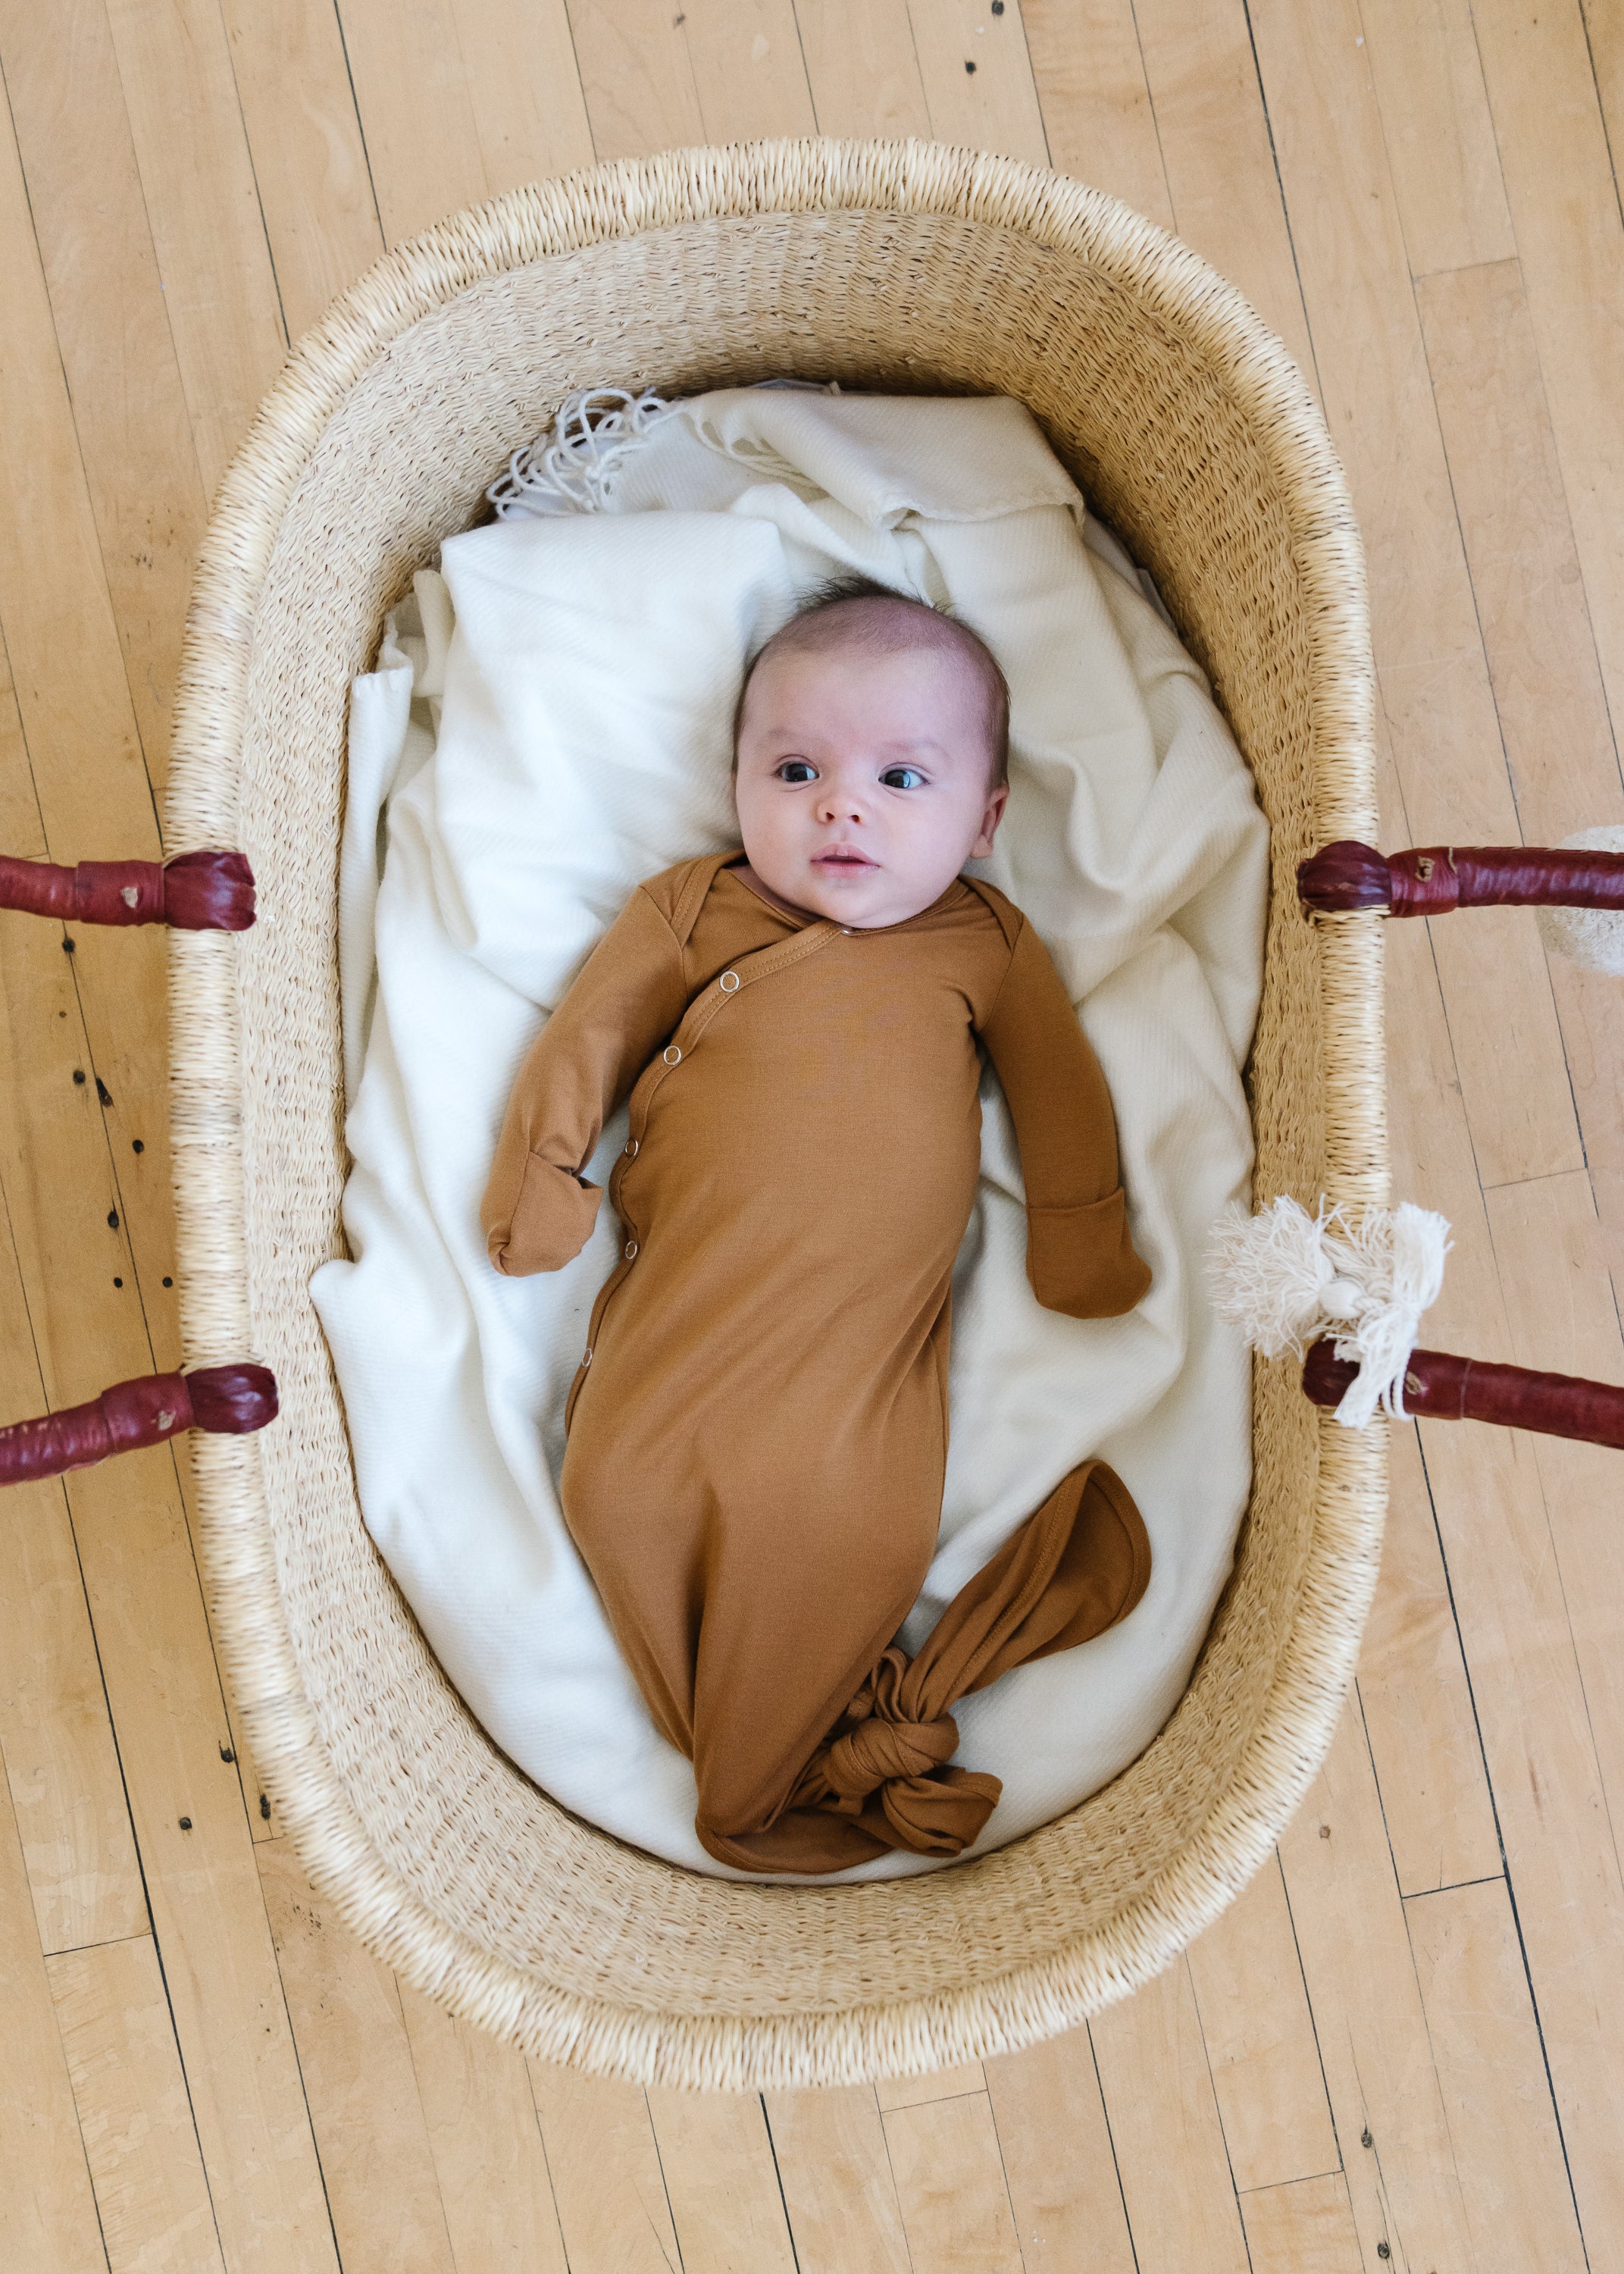 Newborn Knotted Gown - Camel